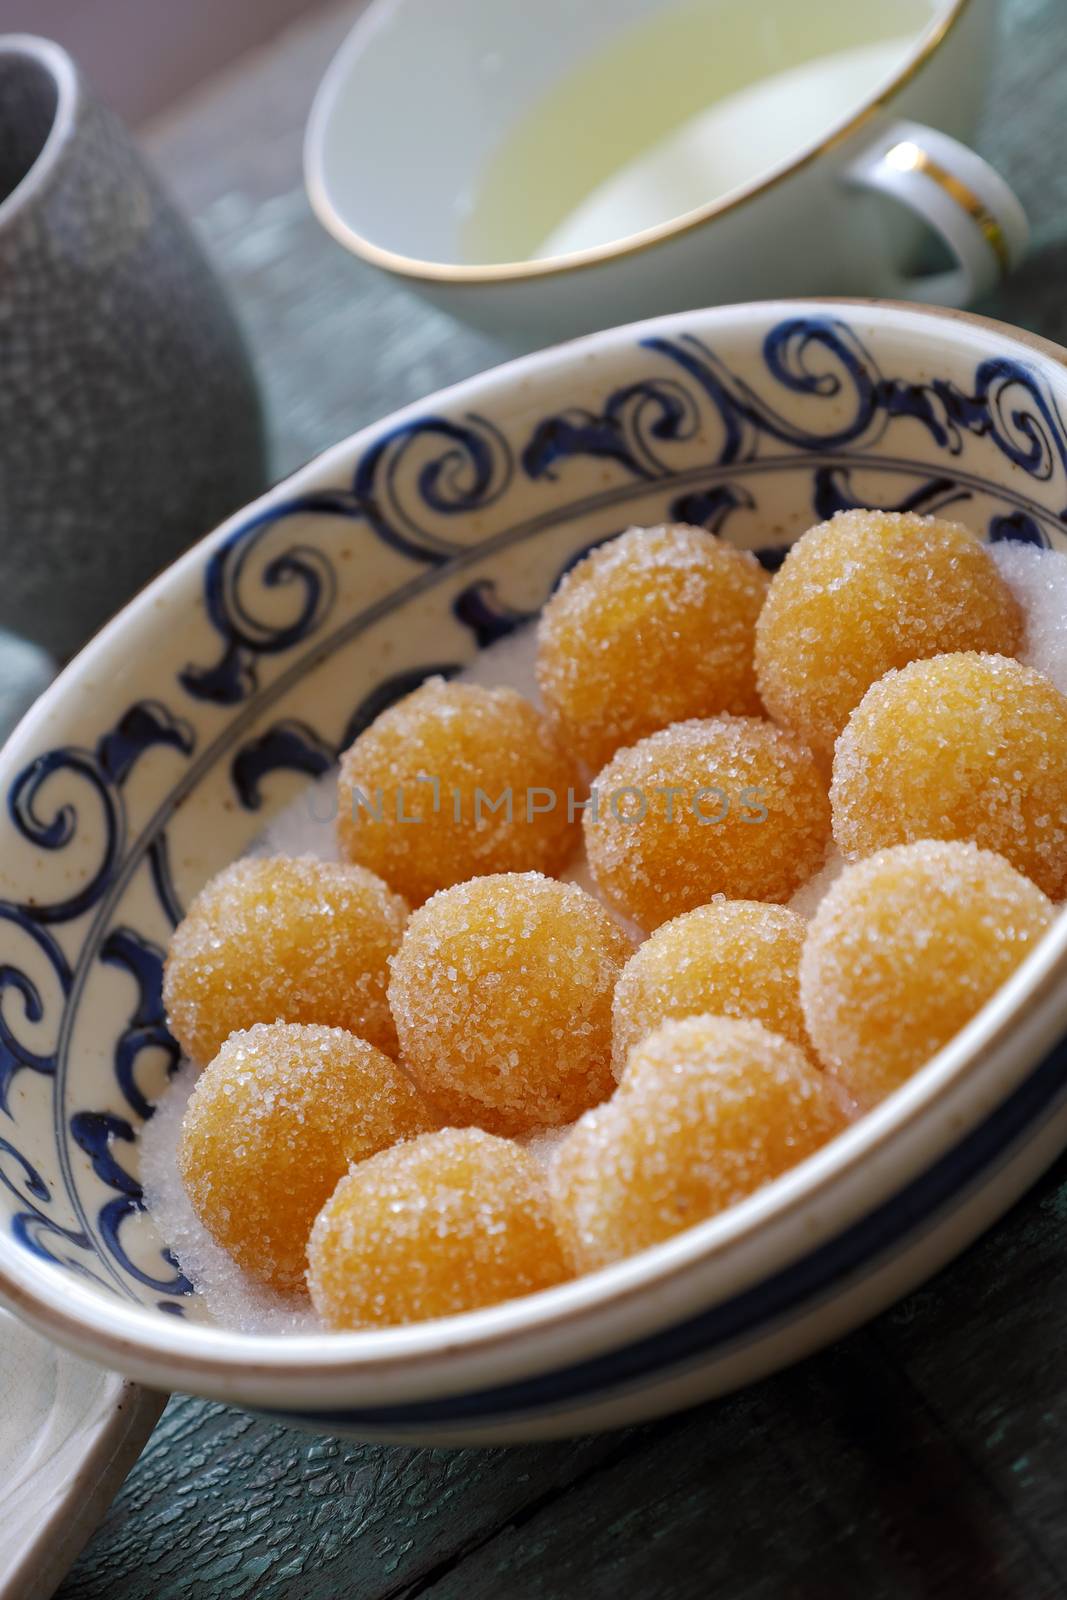 Vietnamese sweet food for tet holiday, home made pineapple jam in ball on wooden background, a traditional eating for lunar new year in Vietnam